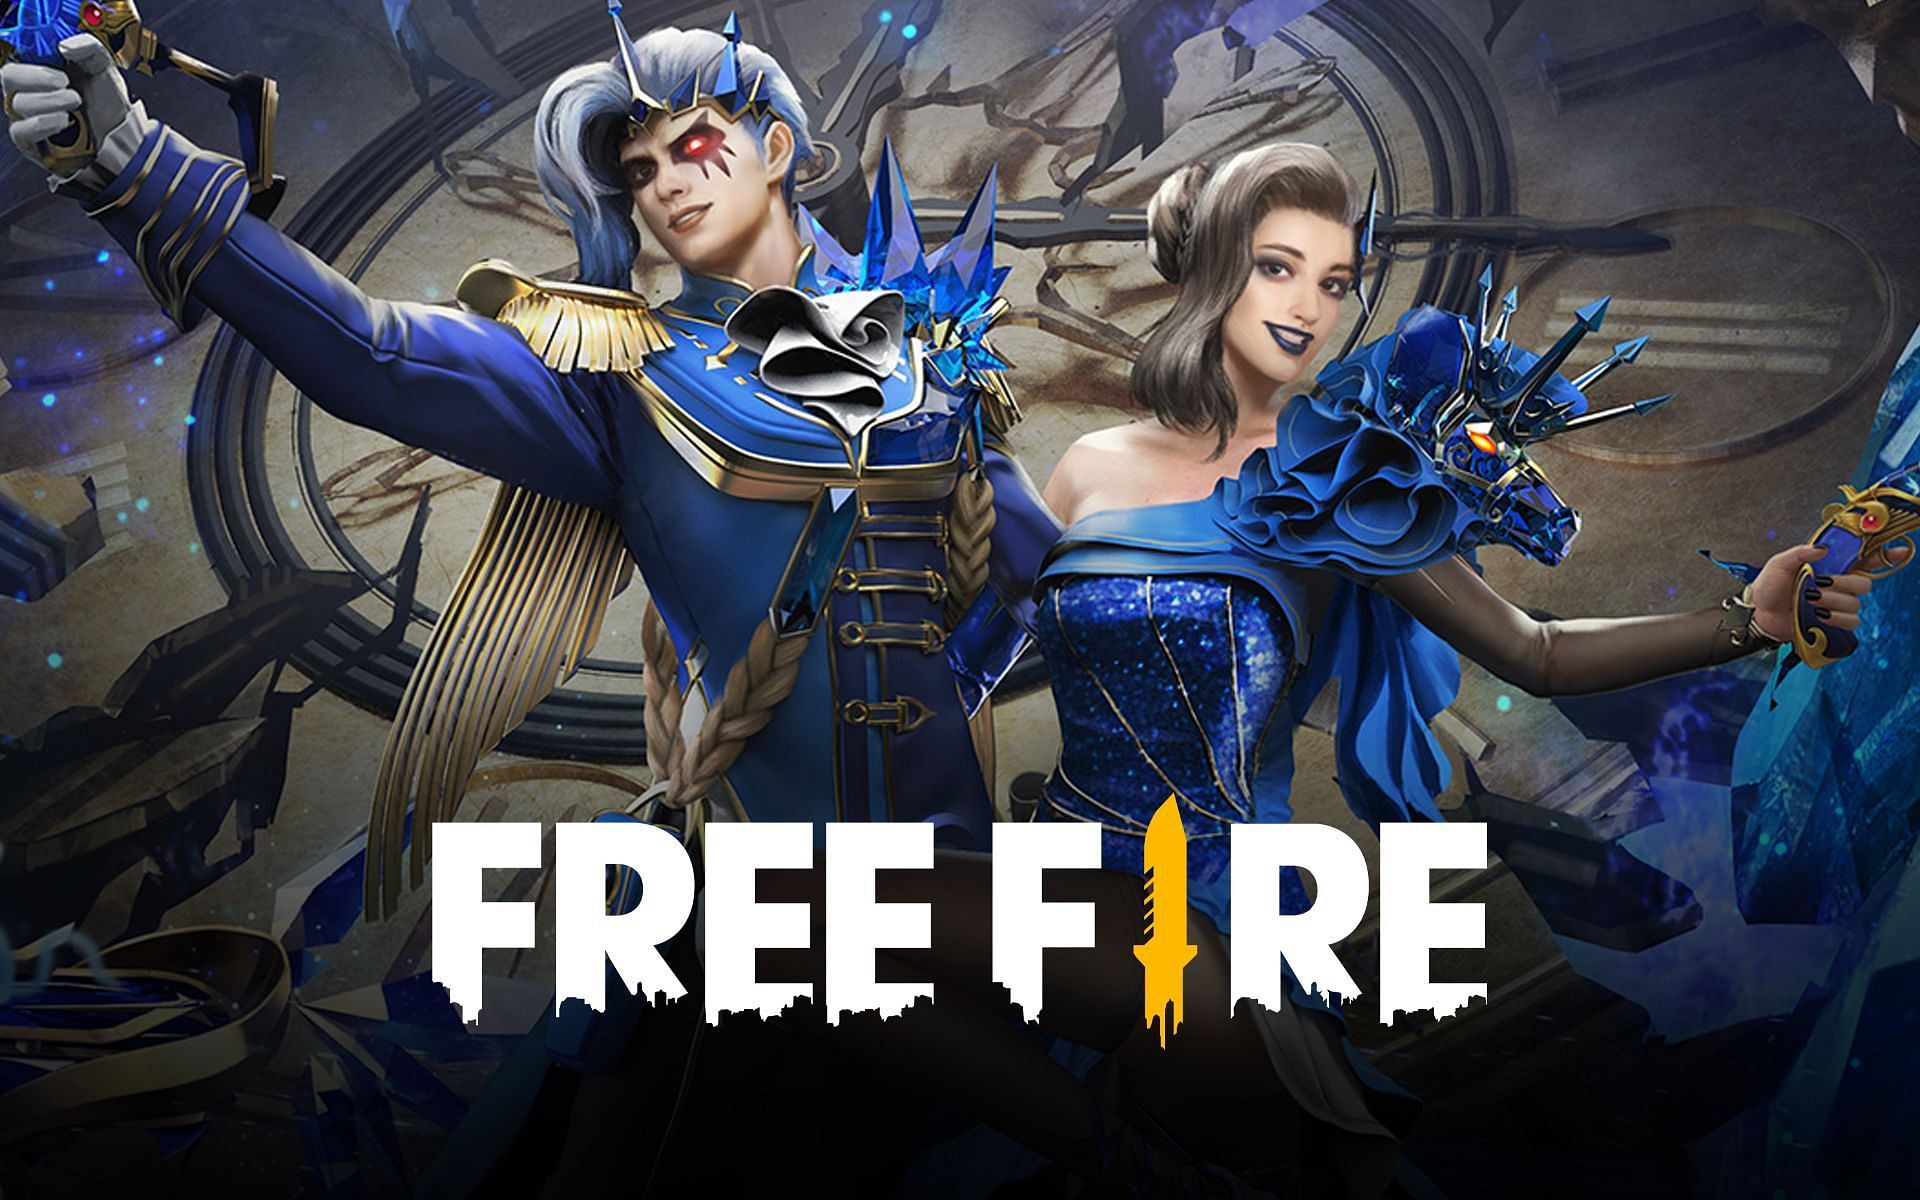 How to play Free Fire demo online without downloading: Step by Step guide